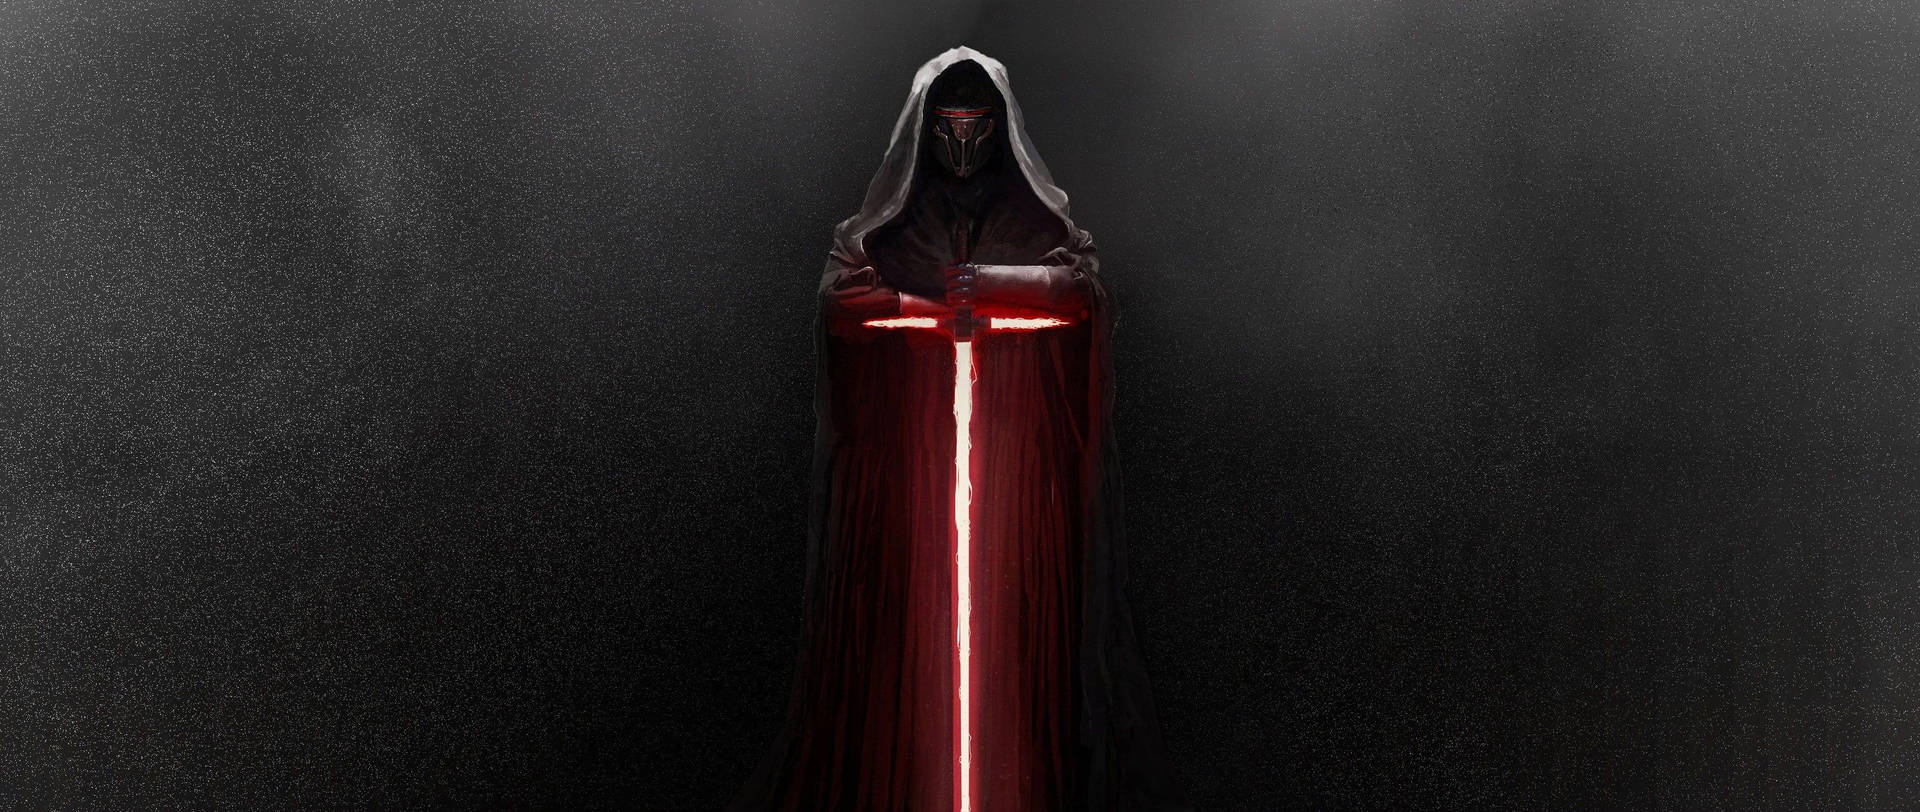 The Powerful Sith Lord Darth Revan Background